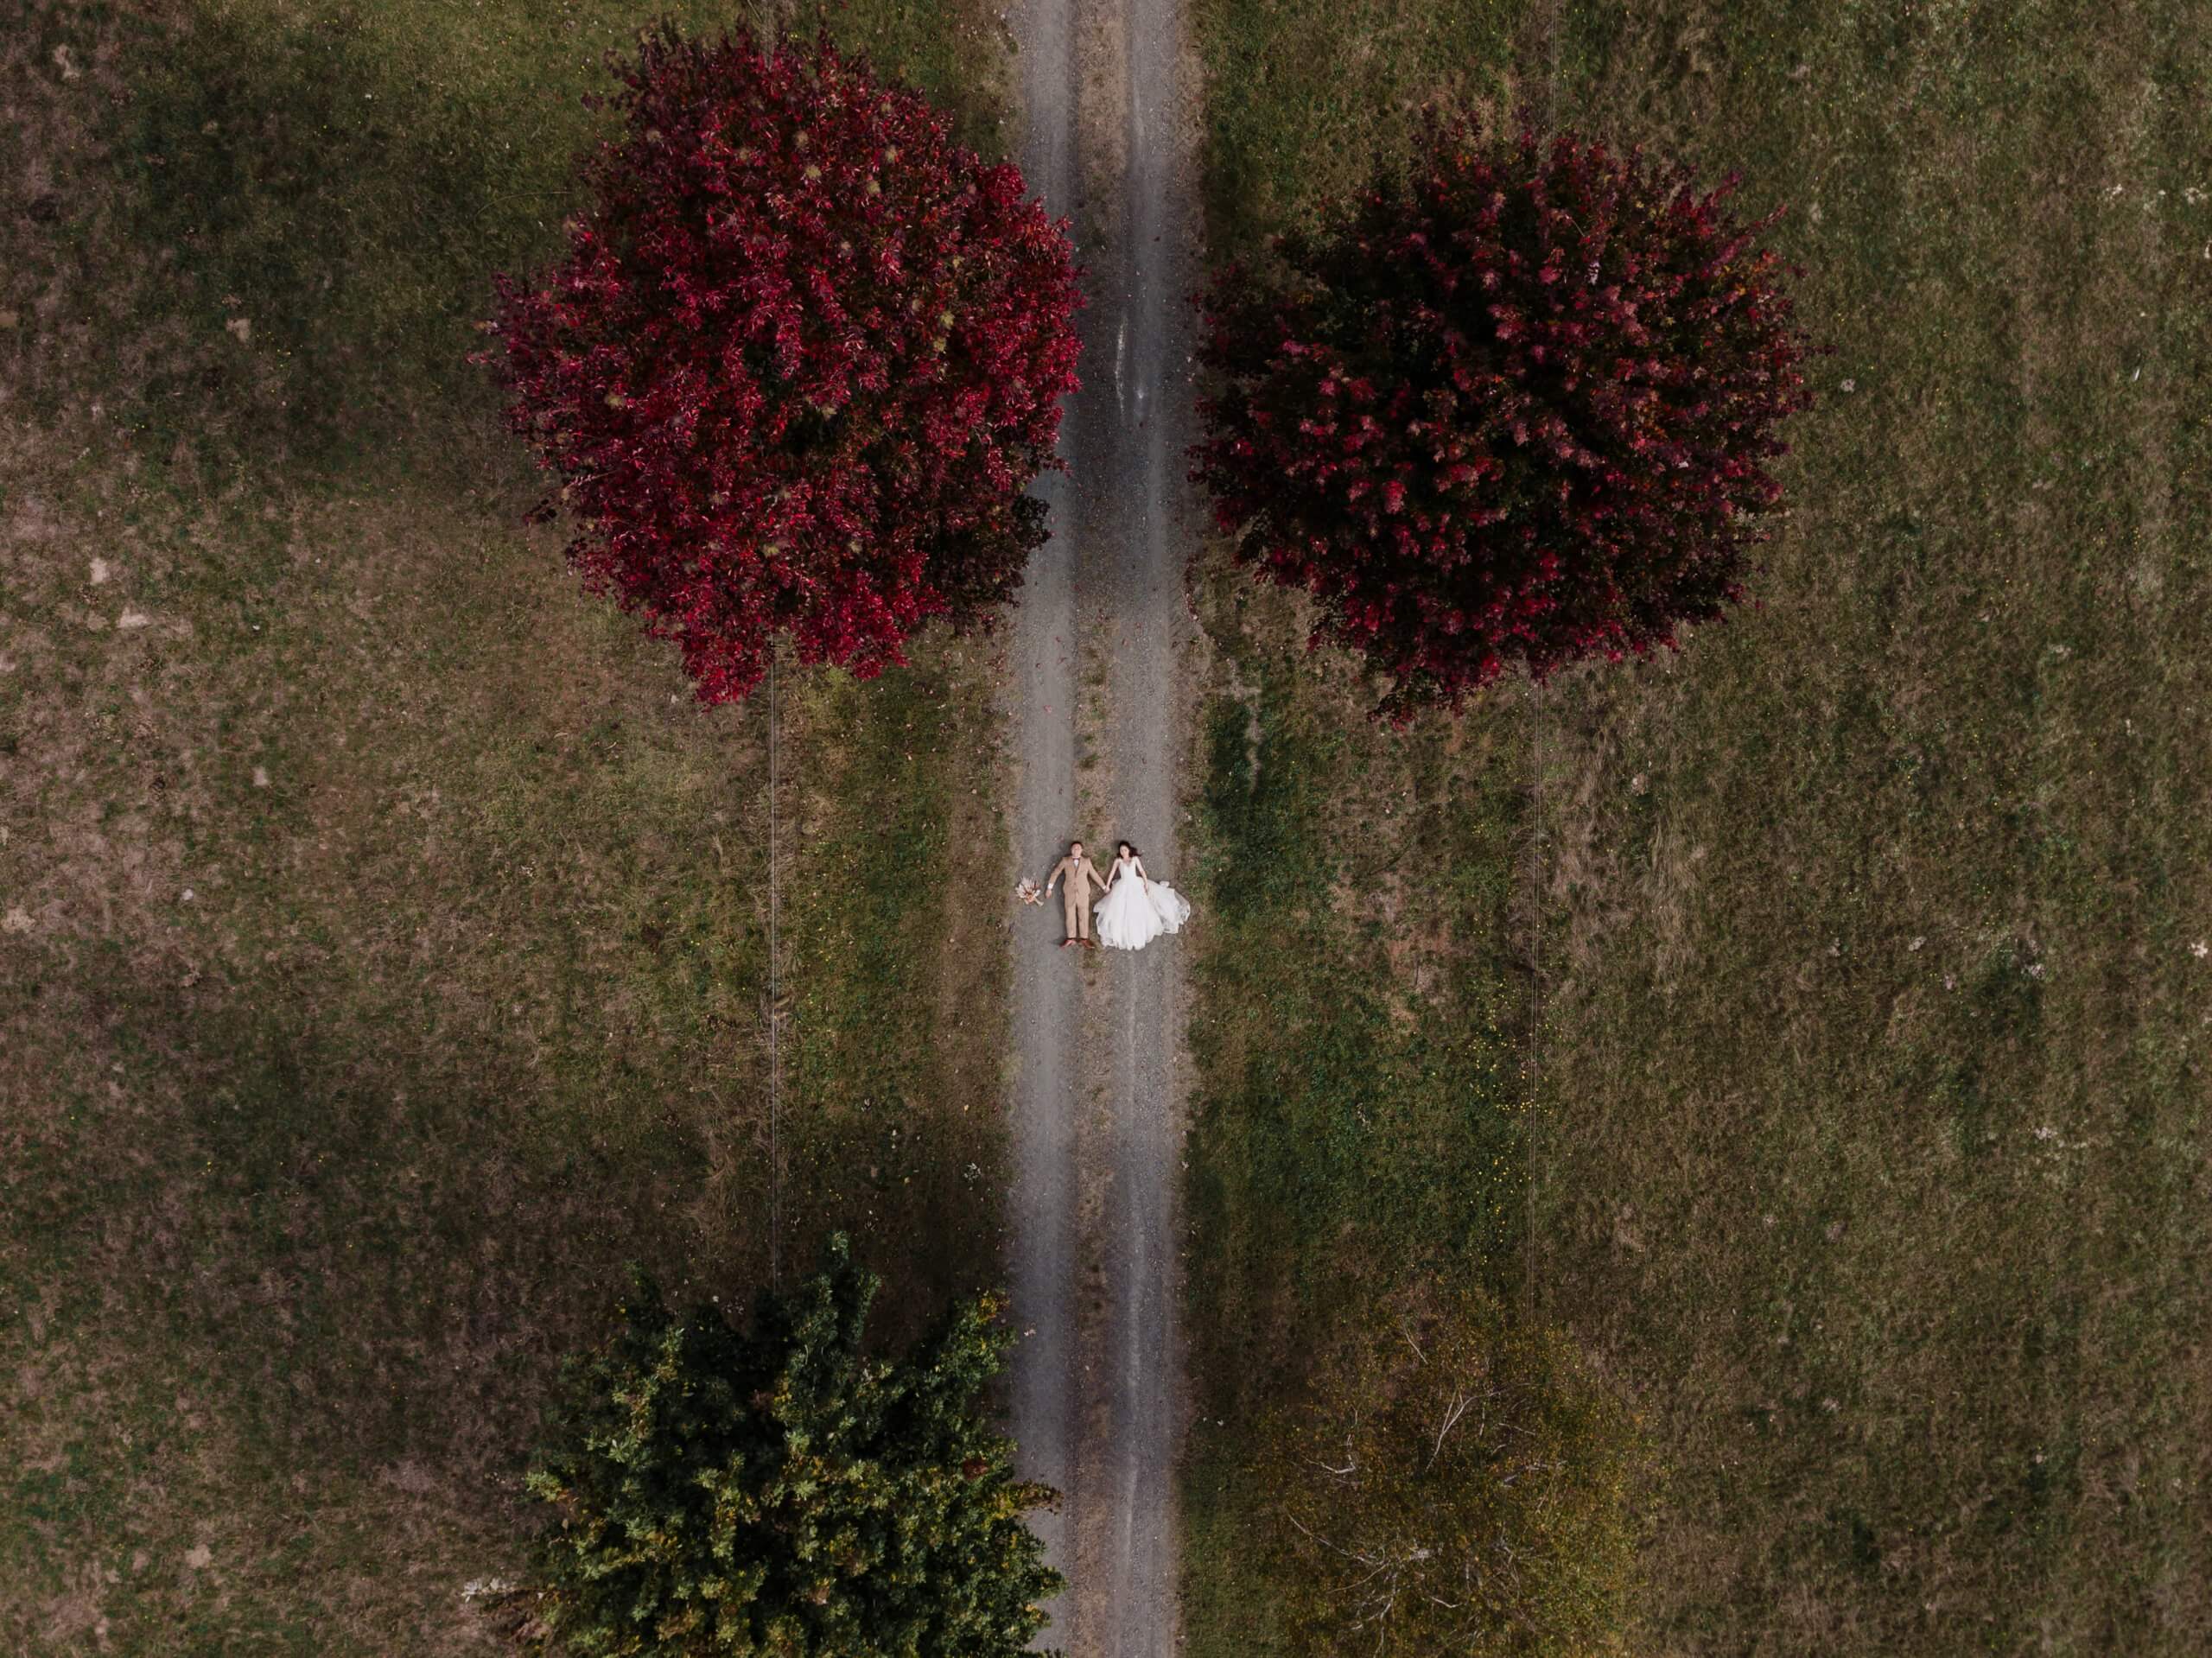 Longshot photo of the bride and groom captured by the drone as they lie down in the middle of the road